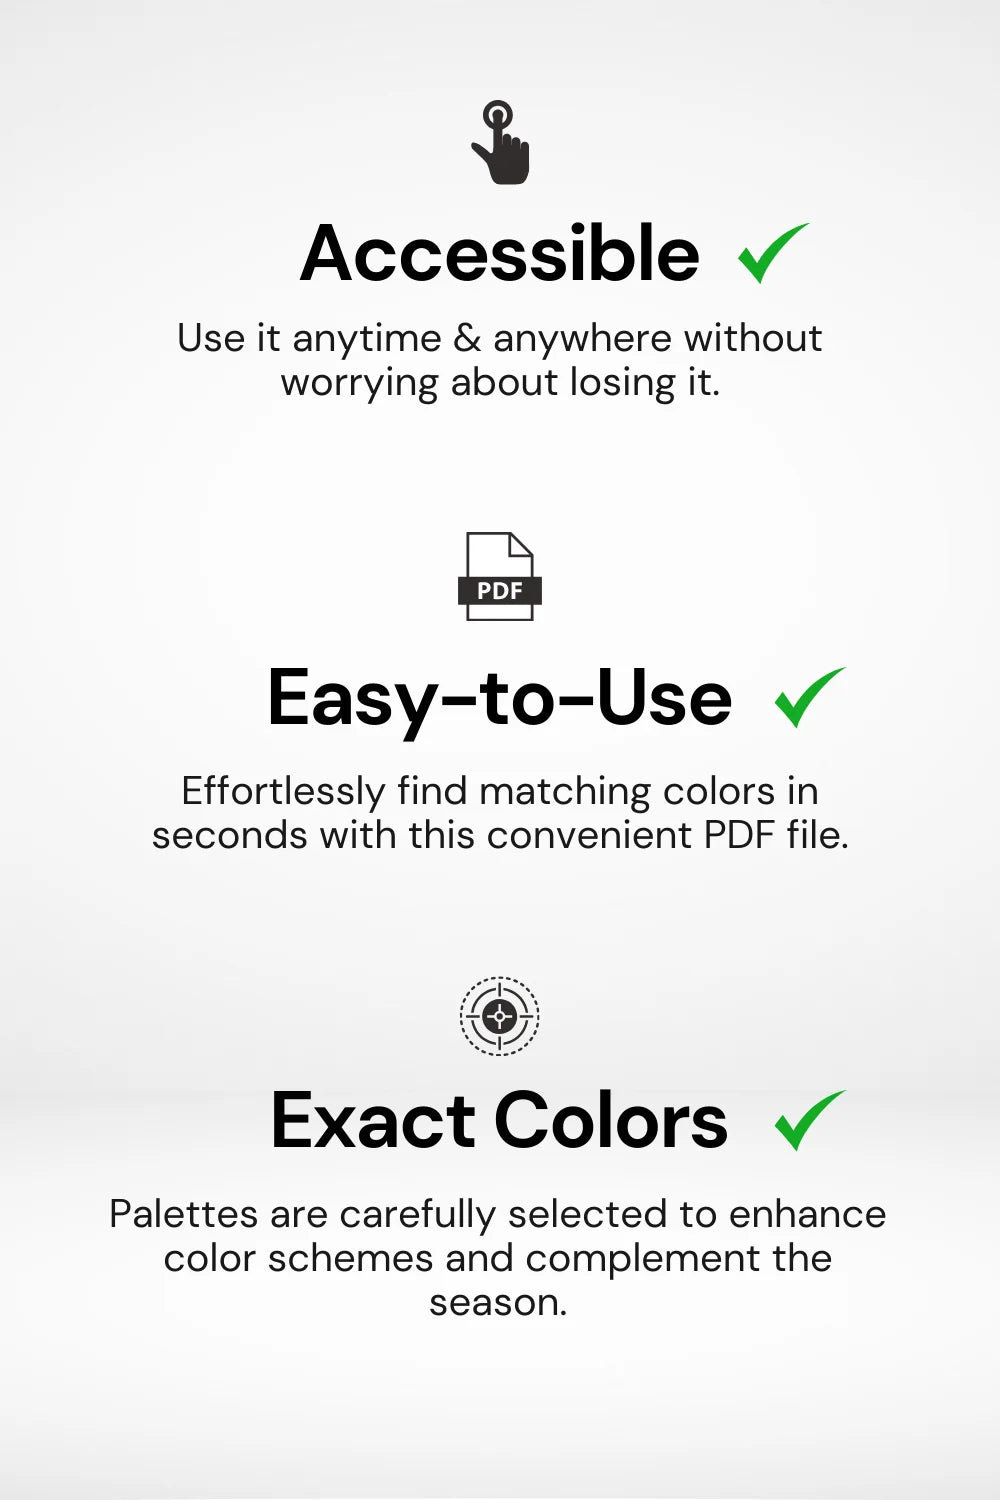 Palette features: accessible, easy-to-use, exact colors, icons, check marks.